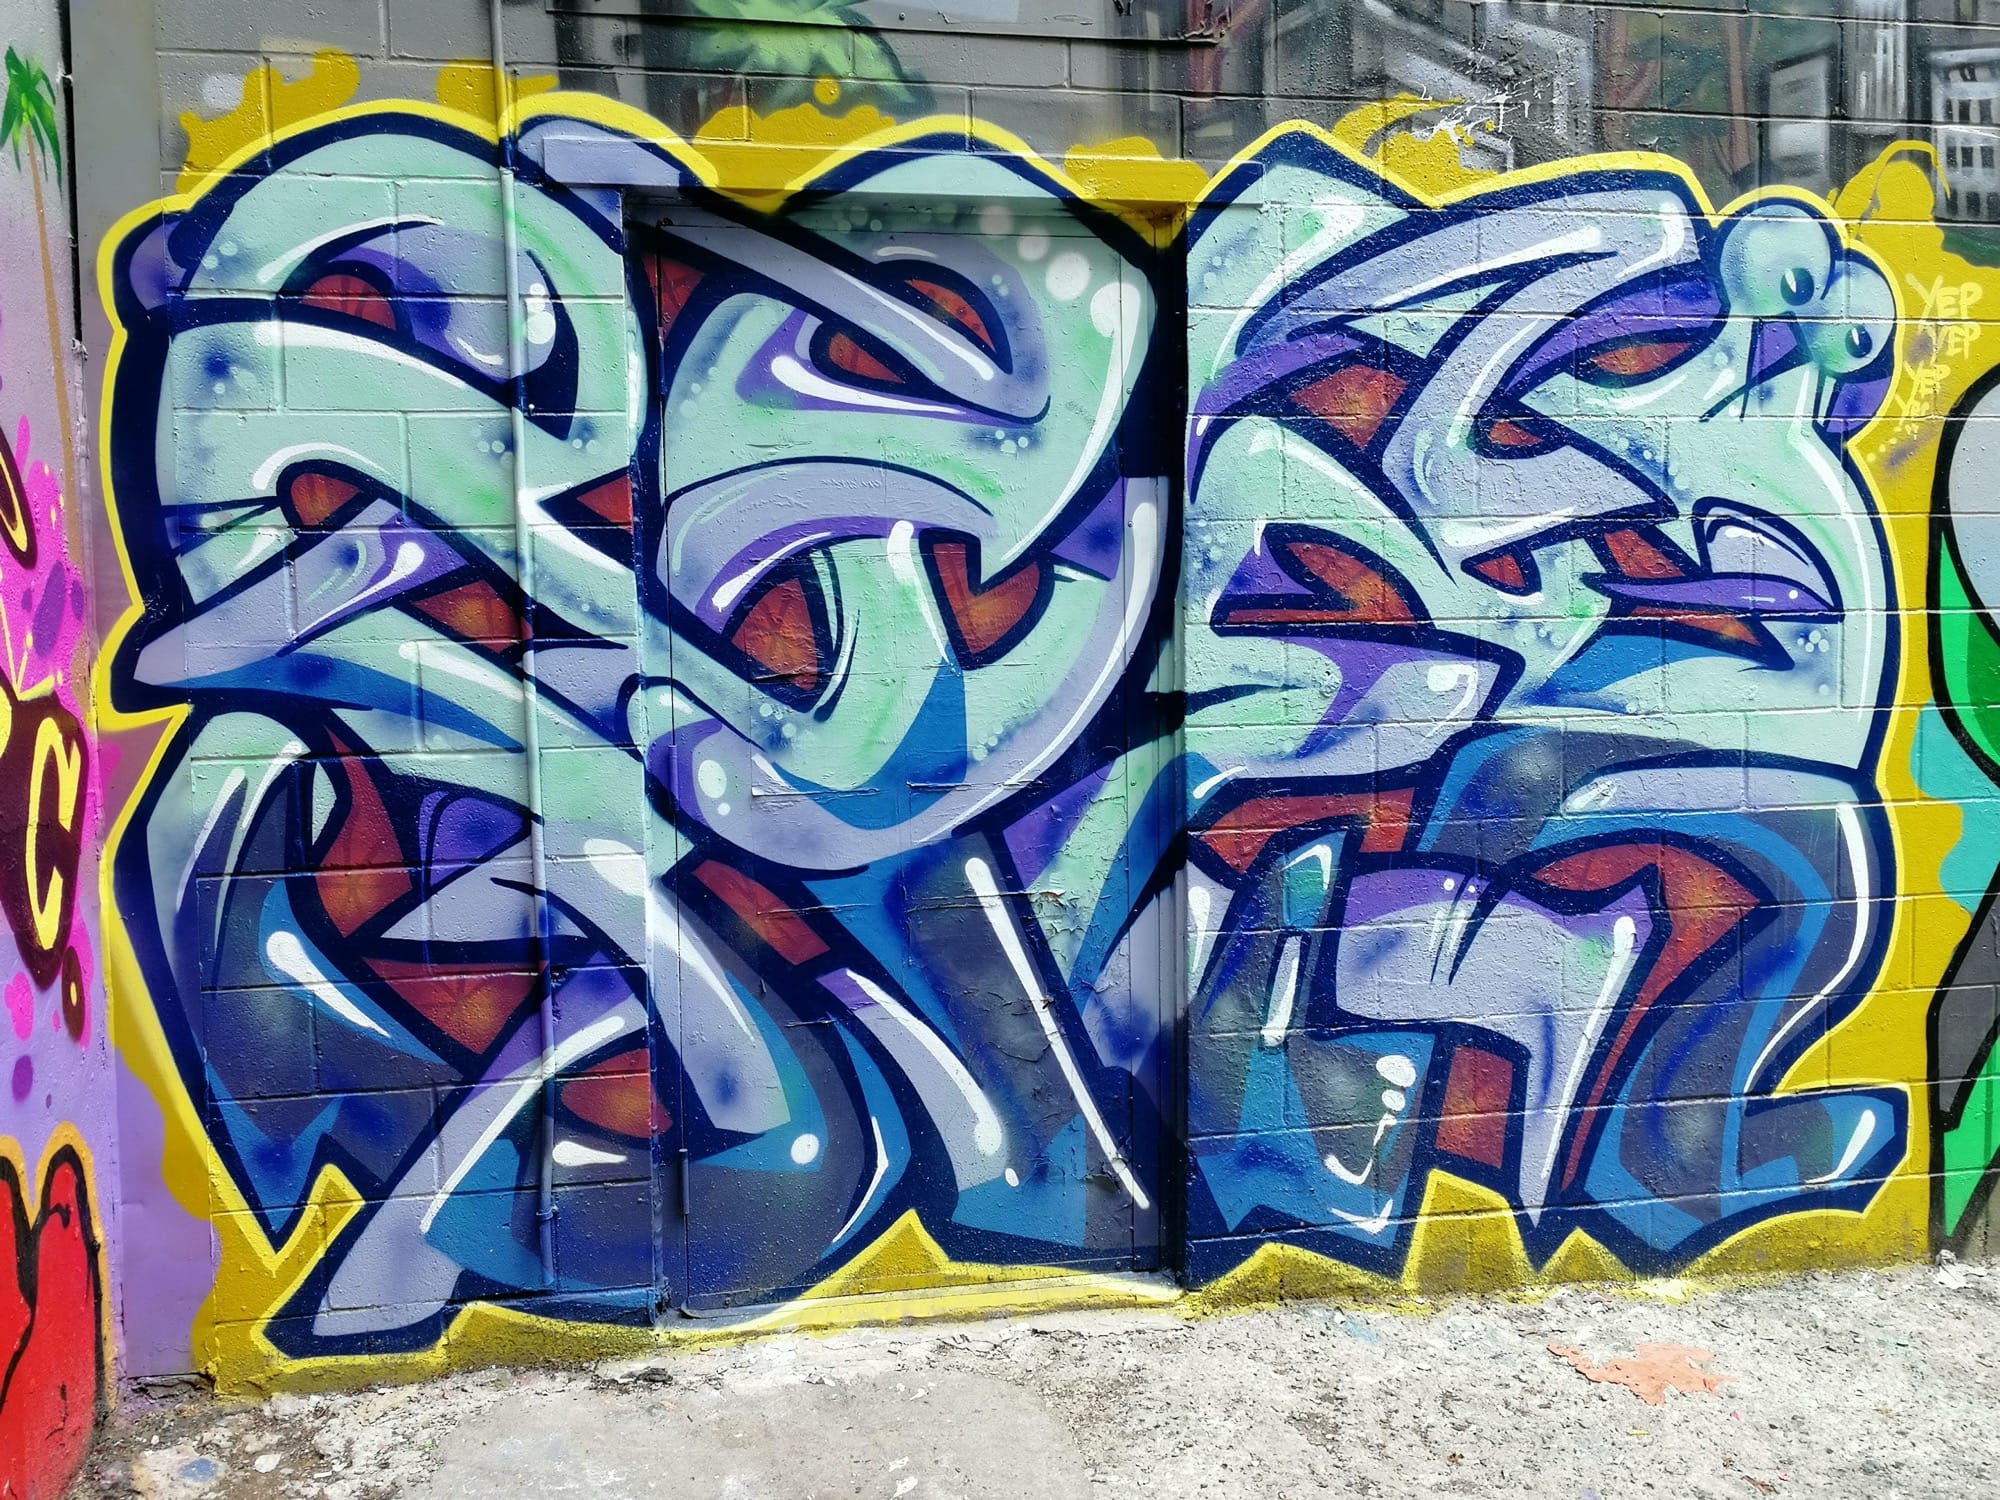 Graffiti 2555  captured by Rabot in Toronto Canada